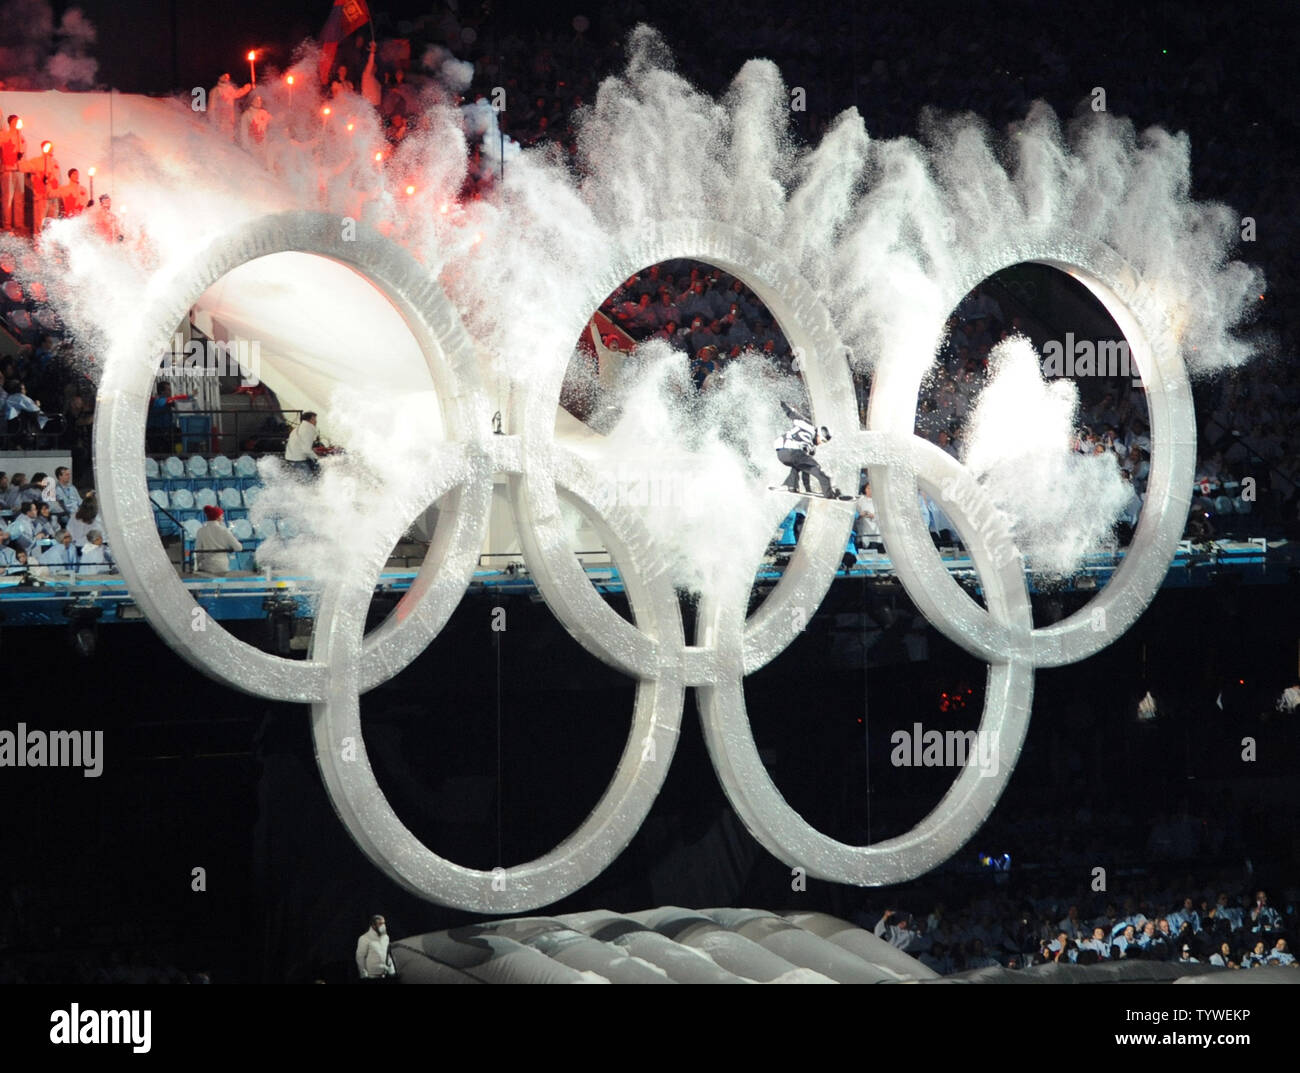 The Canadian snowboarder flys through the Olympic Rings during the opening ceremony for the 2010 Winter Olympics at BC Place in Vancouver, Canada on February 12, 2010.    UPI/Pat Benic Stock Photo